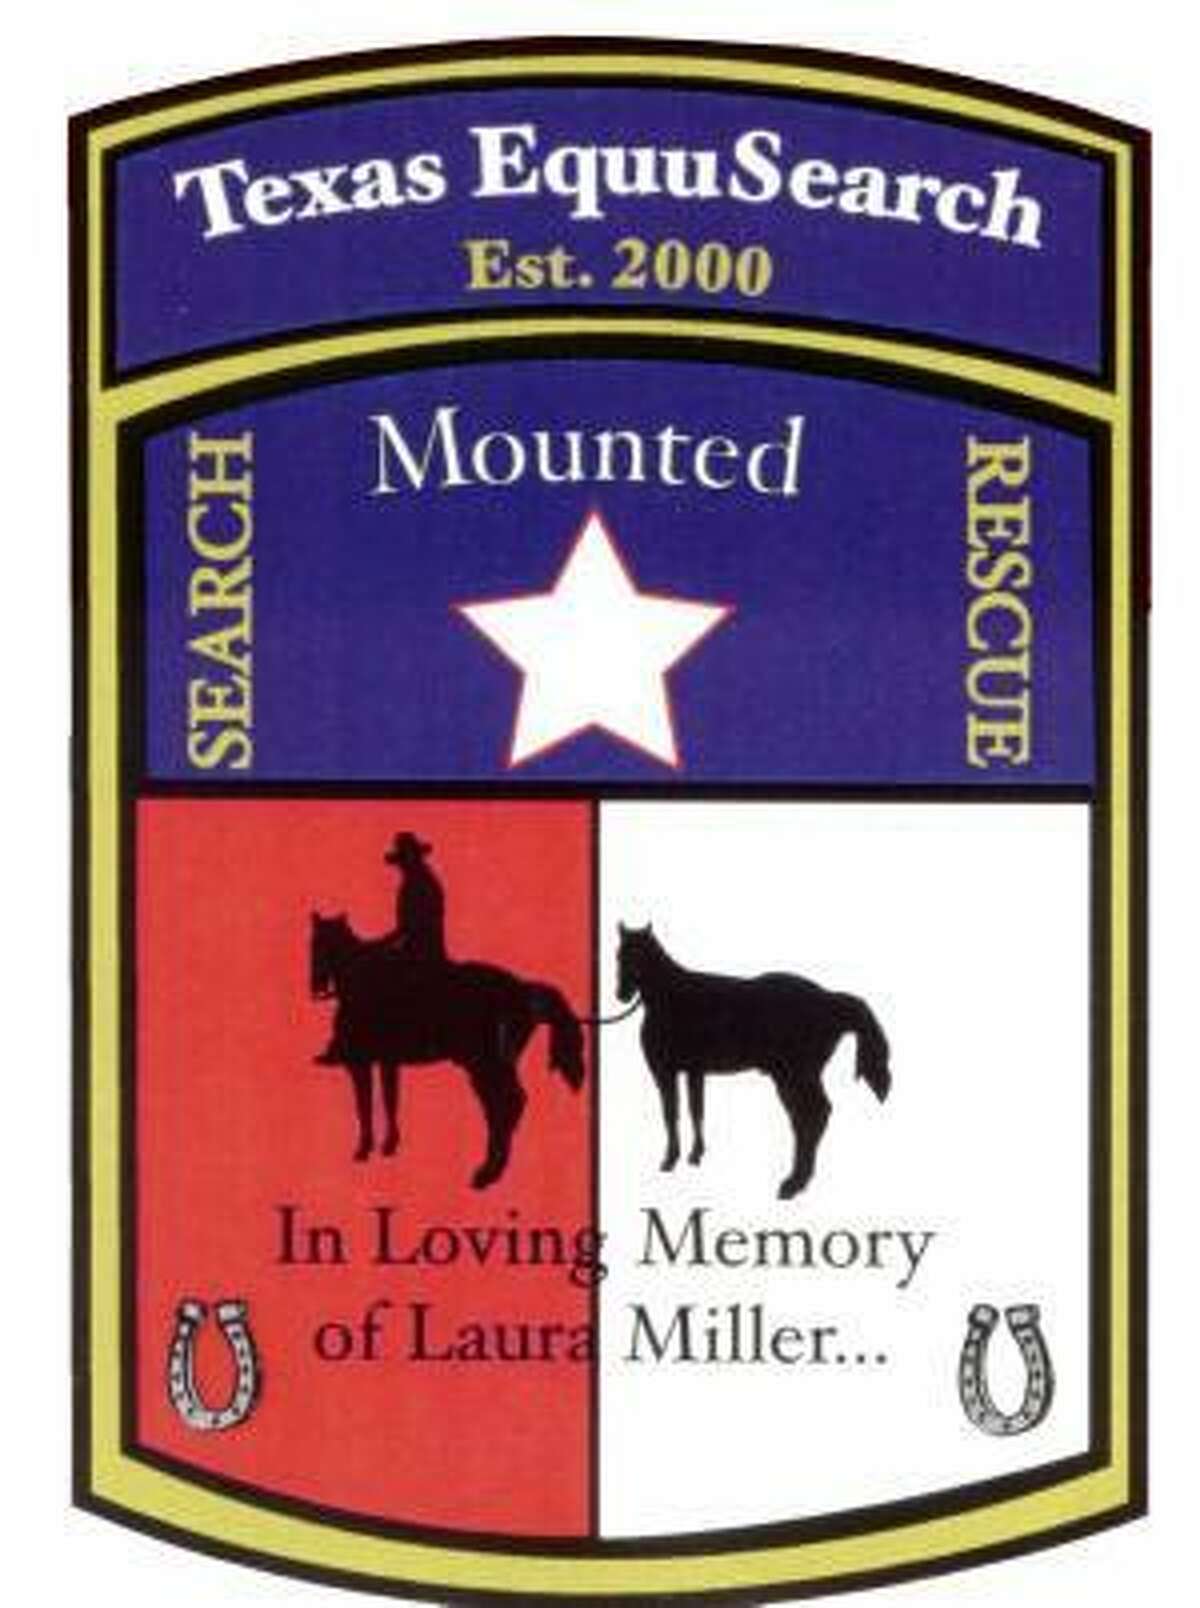 Texas Equusearch’s mounted search and recovery team patch